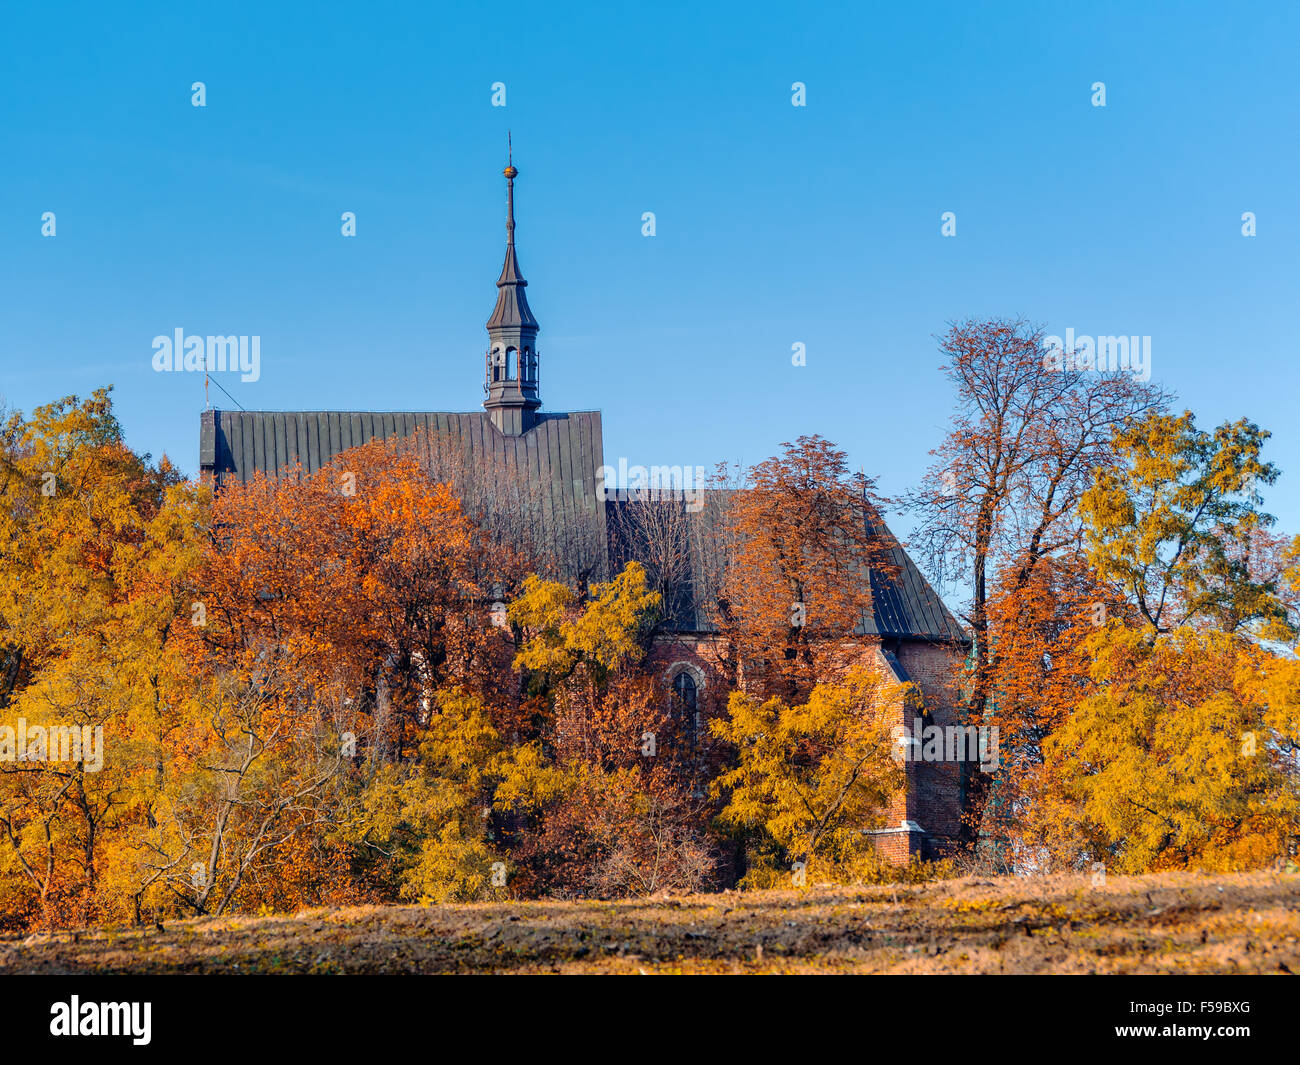 Countryside old catholic church surrounded by trees in fall colors with clear blue sky Stock Photo